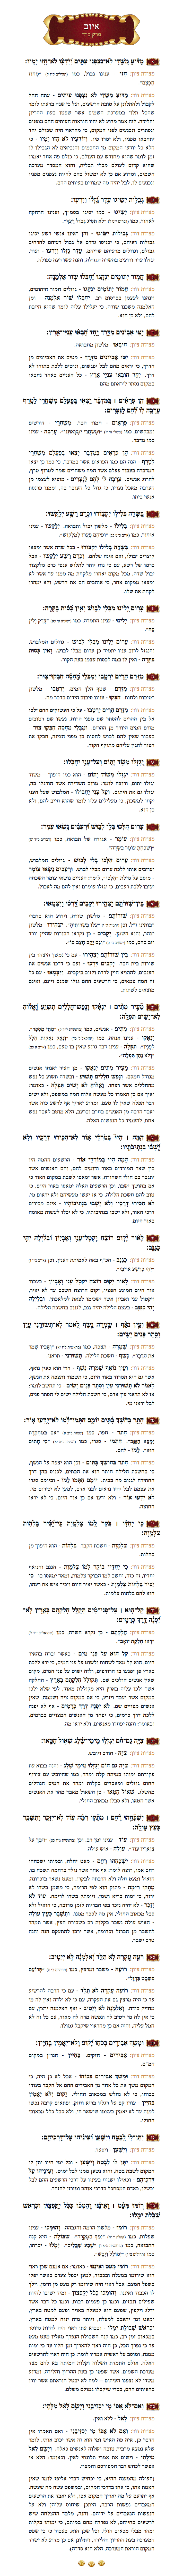 Sefer Iyov Chapter 24 with commentary